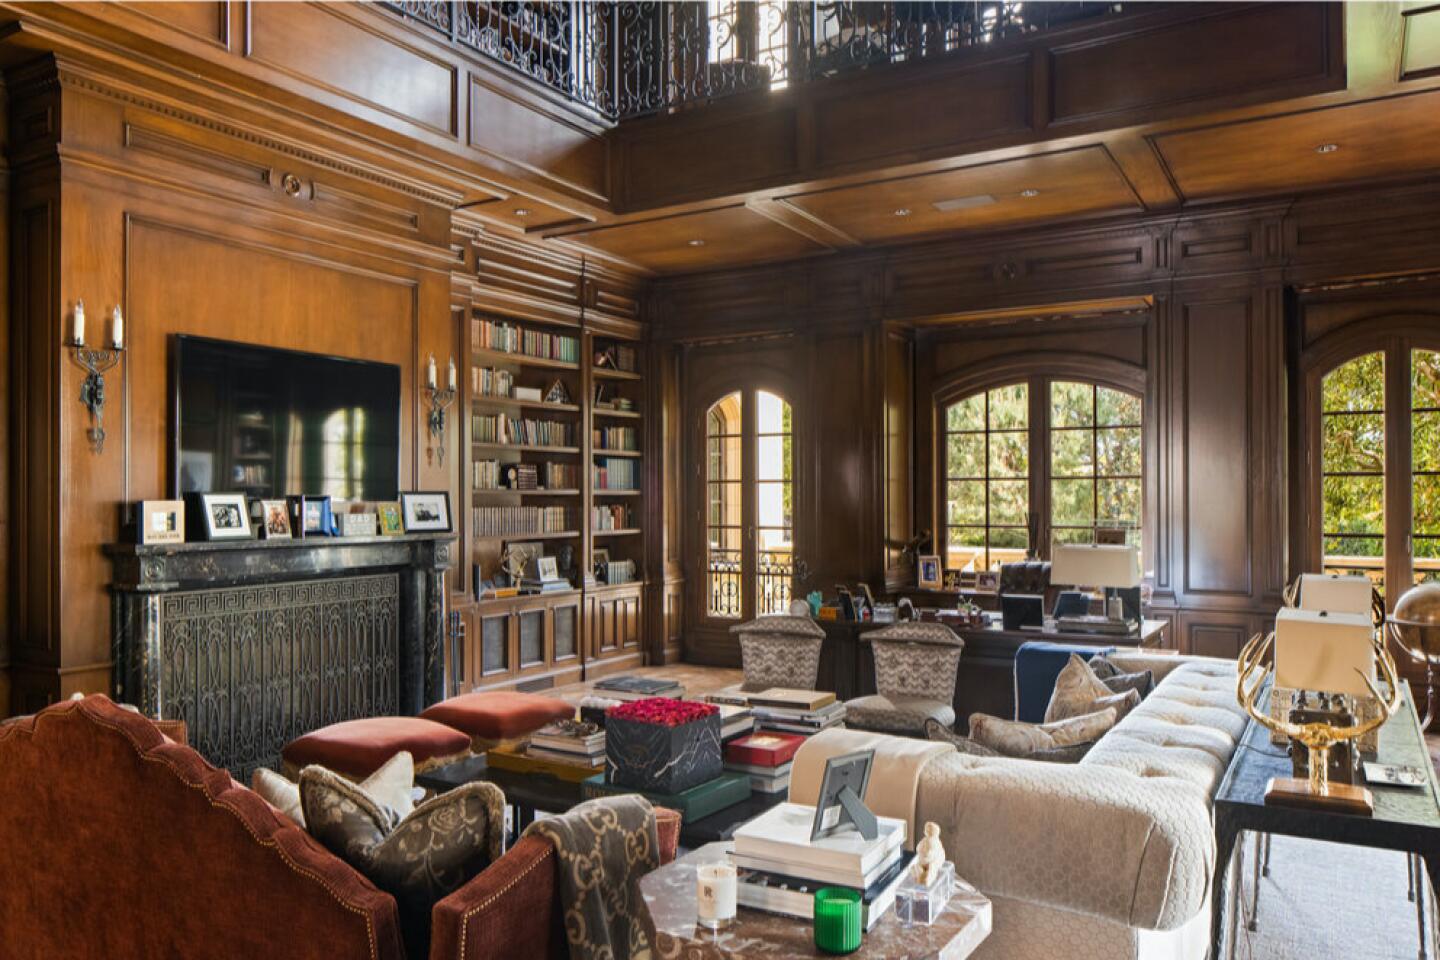 The wood-paneled library with shelves of books and seating with windows overlooking greenery.